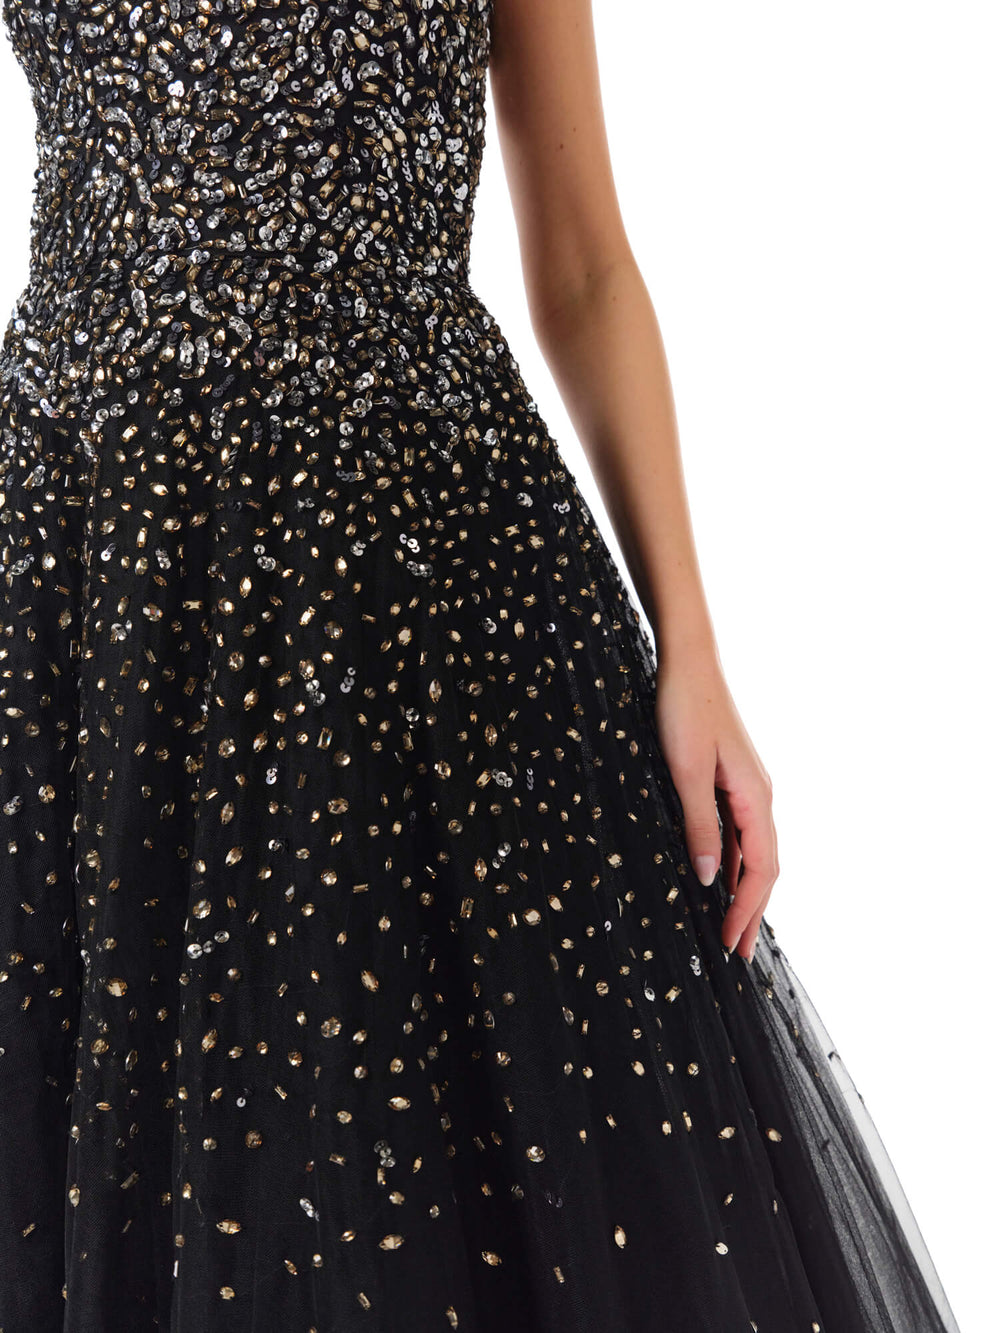 Monique Lhuillier Spring 2024 black tulle gown with metallic embroidery and high-low hem - detail skirt.